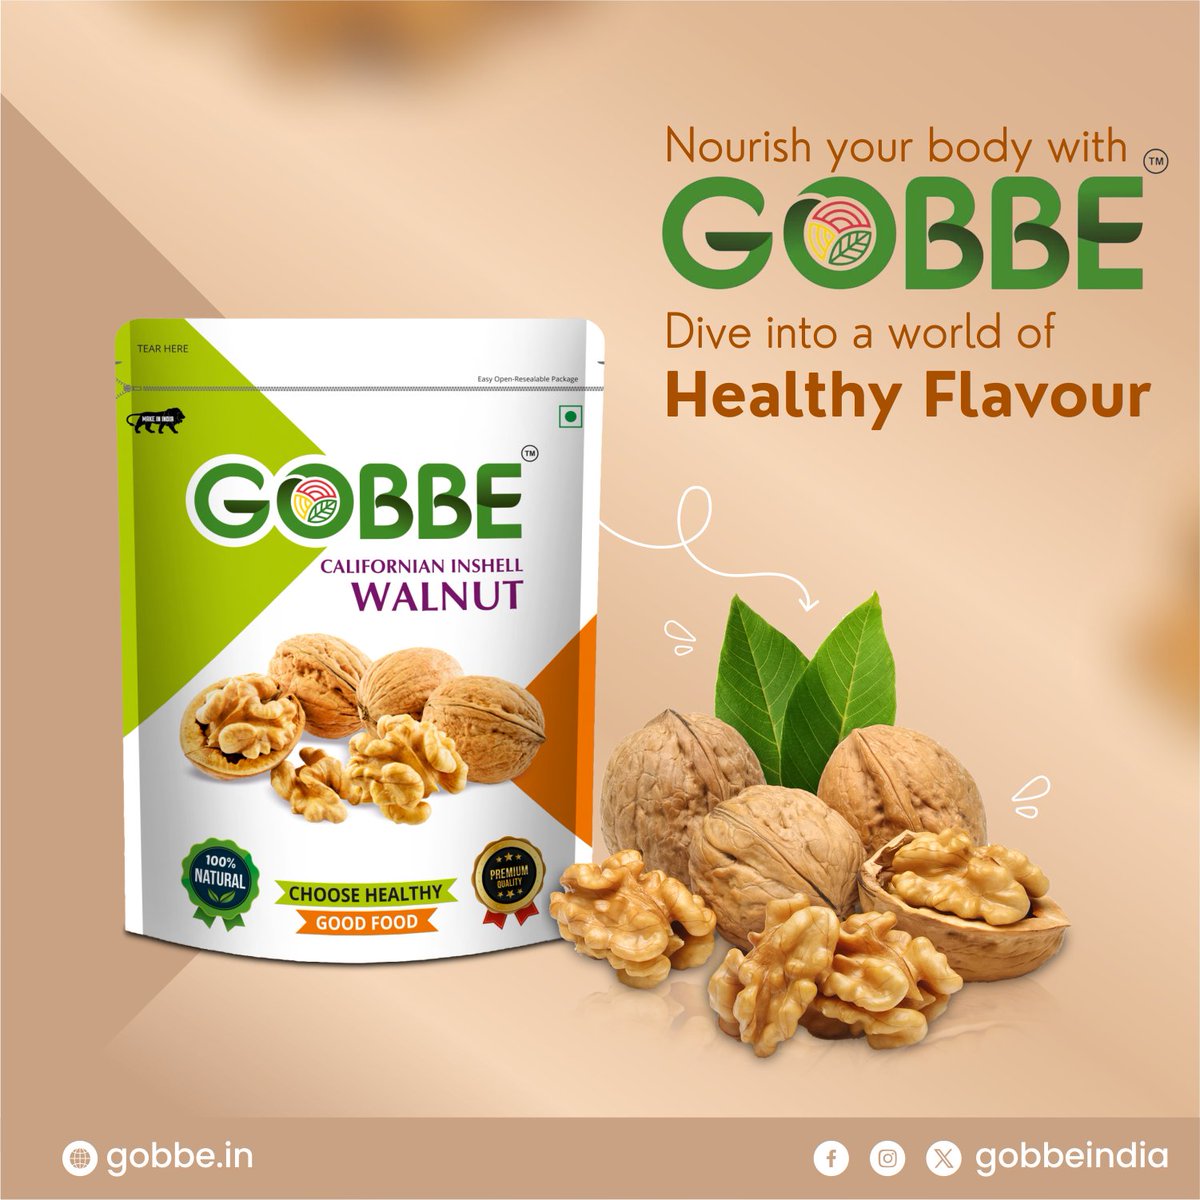 Indulge in a delectable experience at GOBBE.
Order & get your favourite flavour now!!
linktr.ee/gobbeindia

#gobbe #healthconsciousliving #nutrition #premiumdryfruits #nutsandseeds #naturetreasures #qualityindulgence #healthysnacking #dryfruits #dryfruitstore #banglore #india